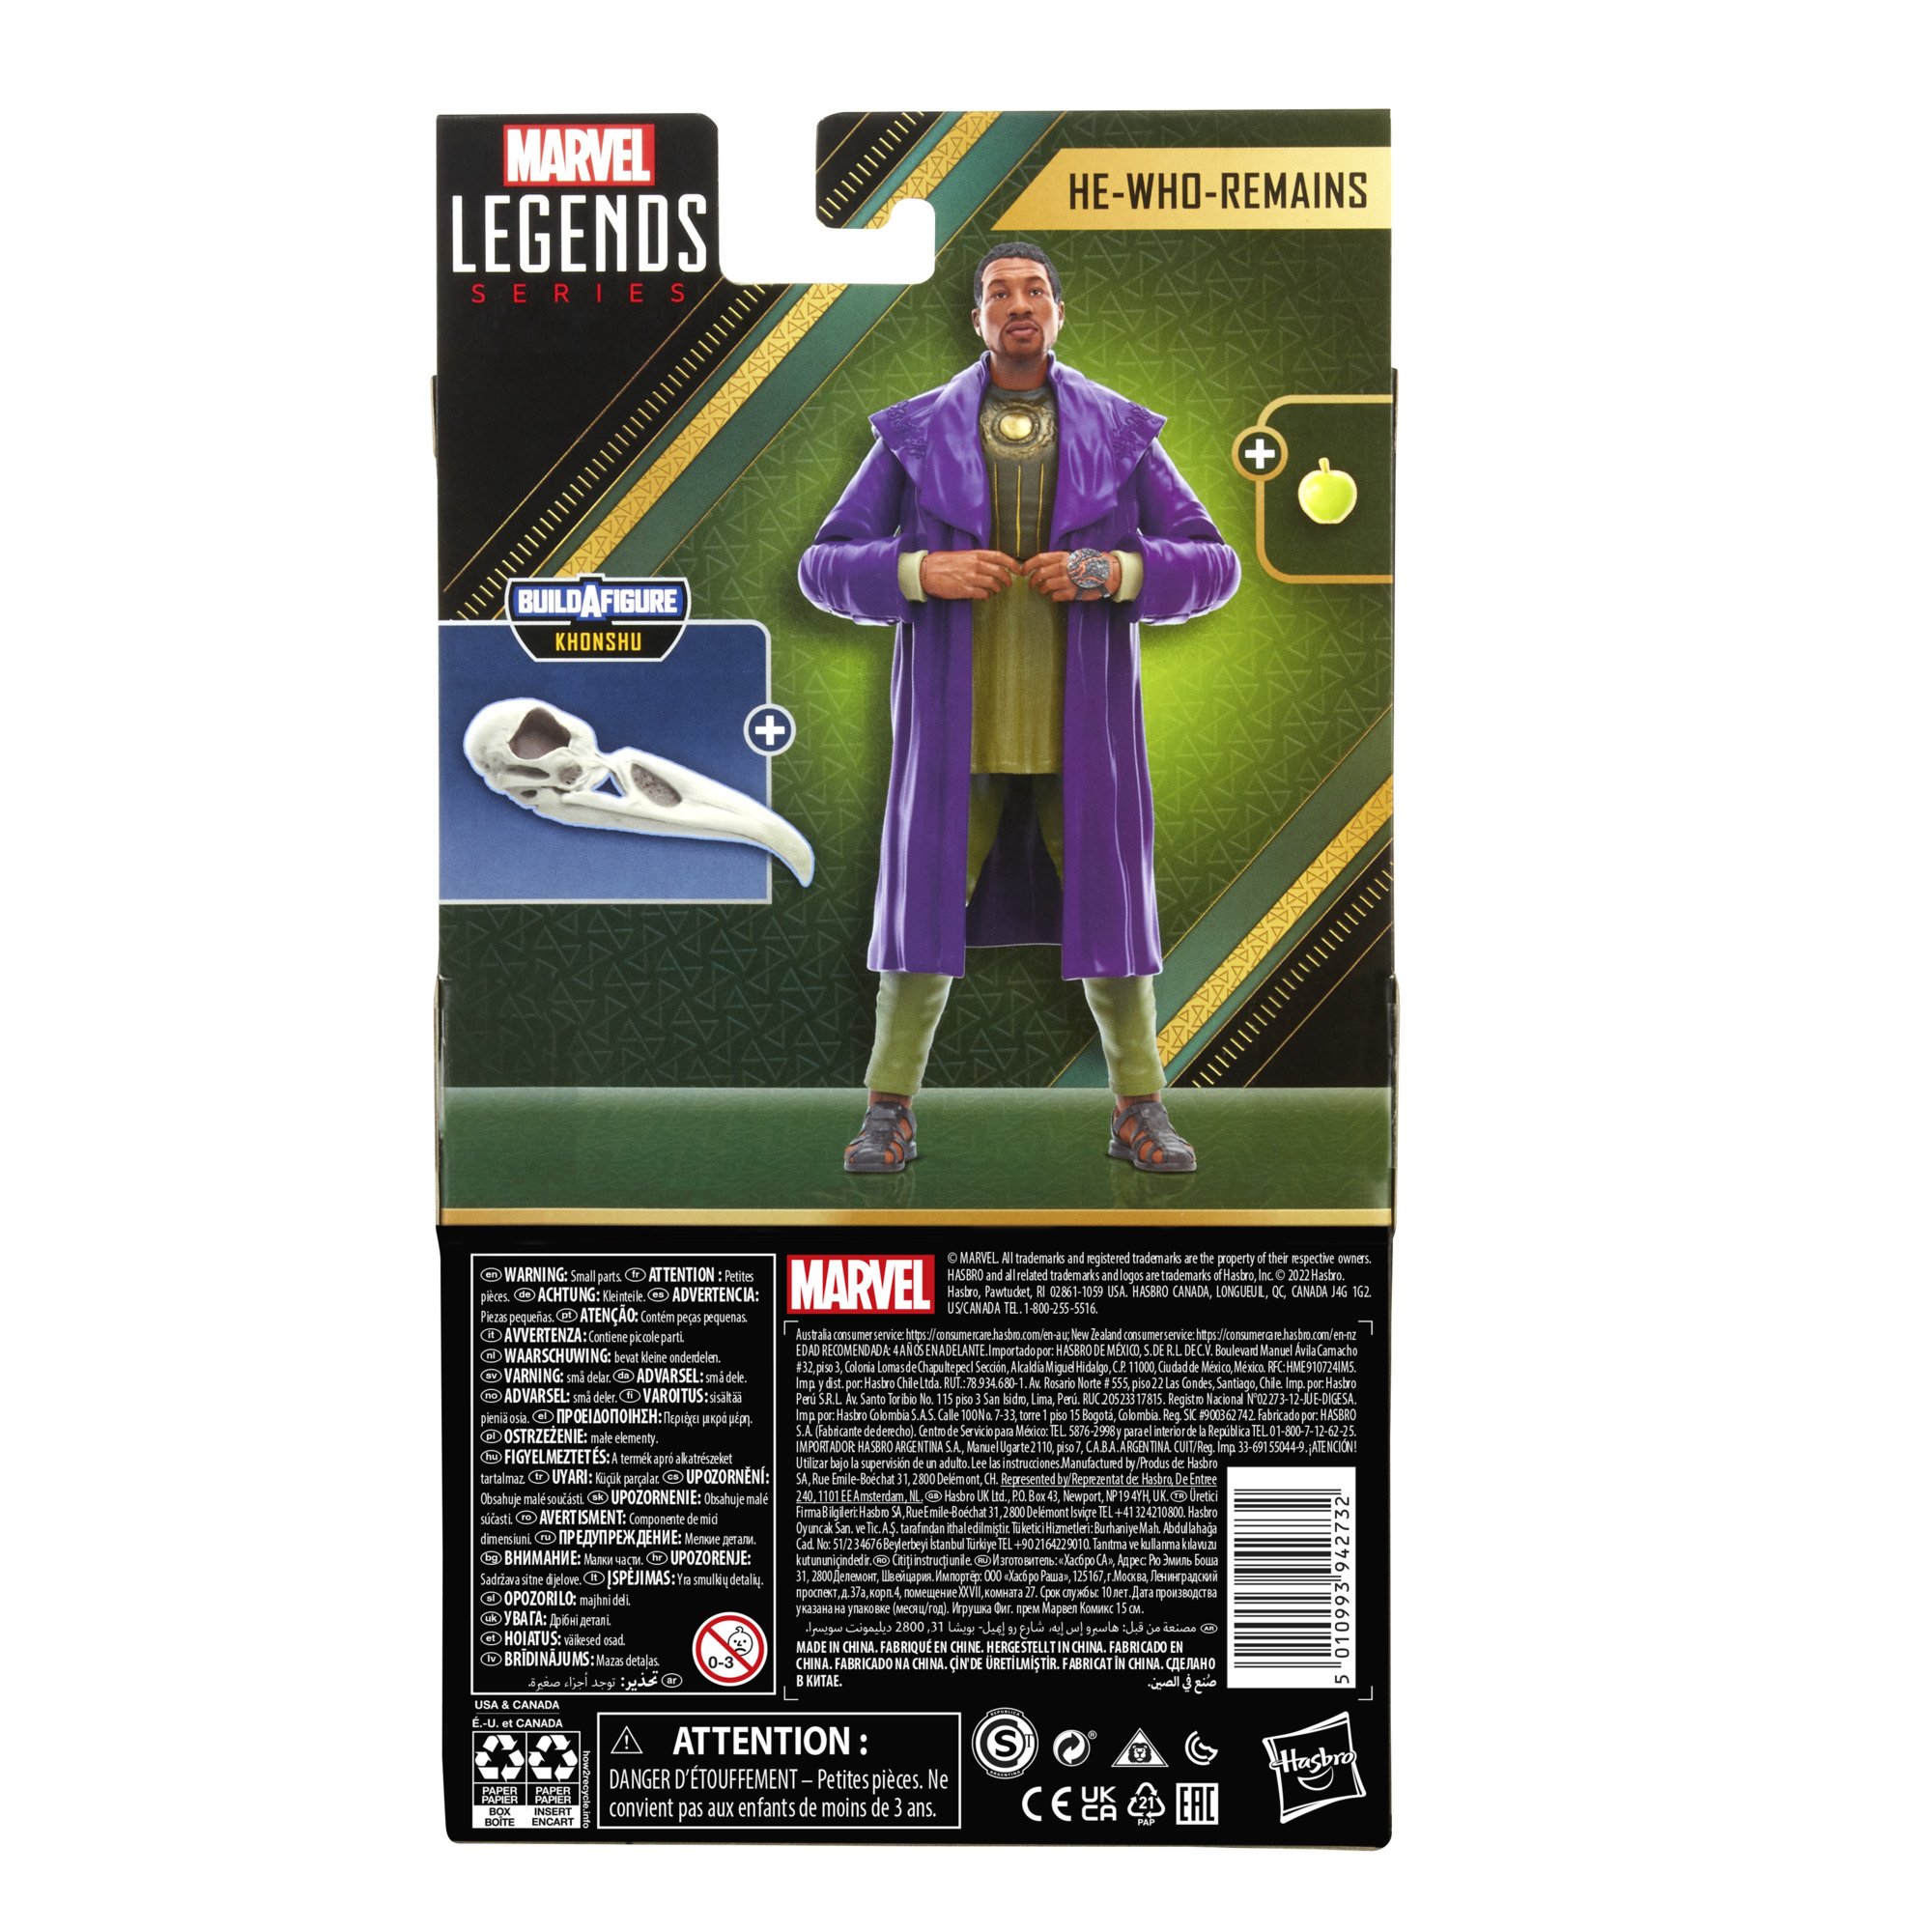 HASBRO MARVEL LEGENDS SERIES HE-WHO-REMAINS 7.jpg